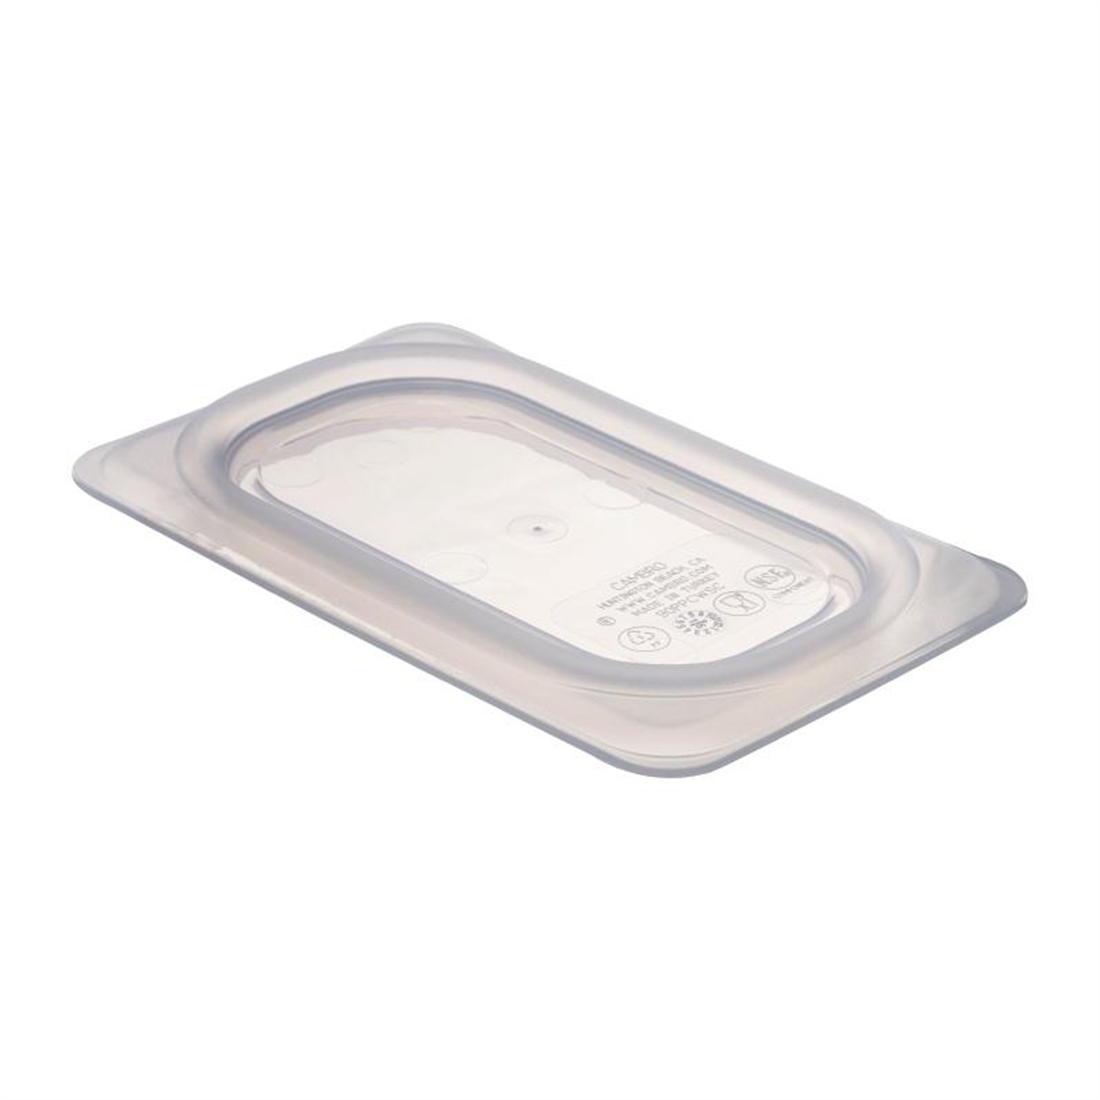 Cambro Gastronorm Pan 1/9 Soft Seal Lid